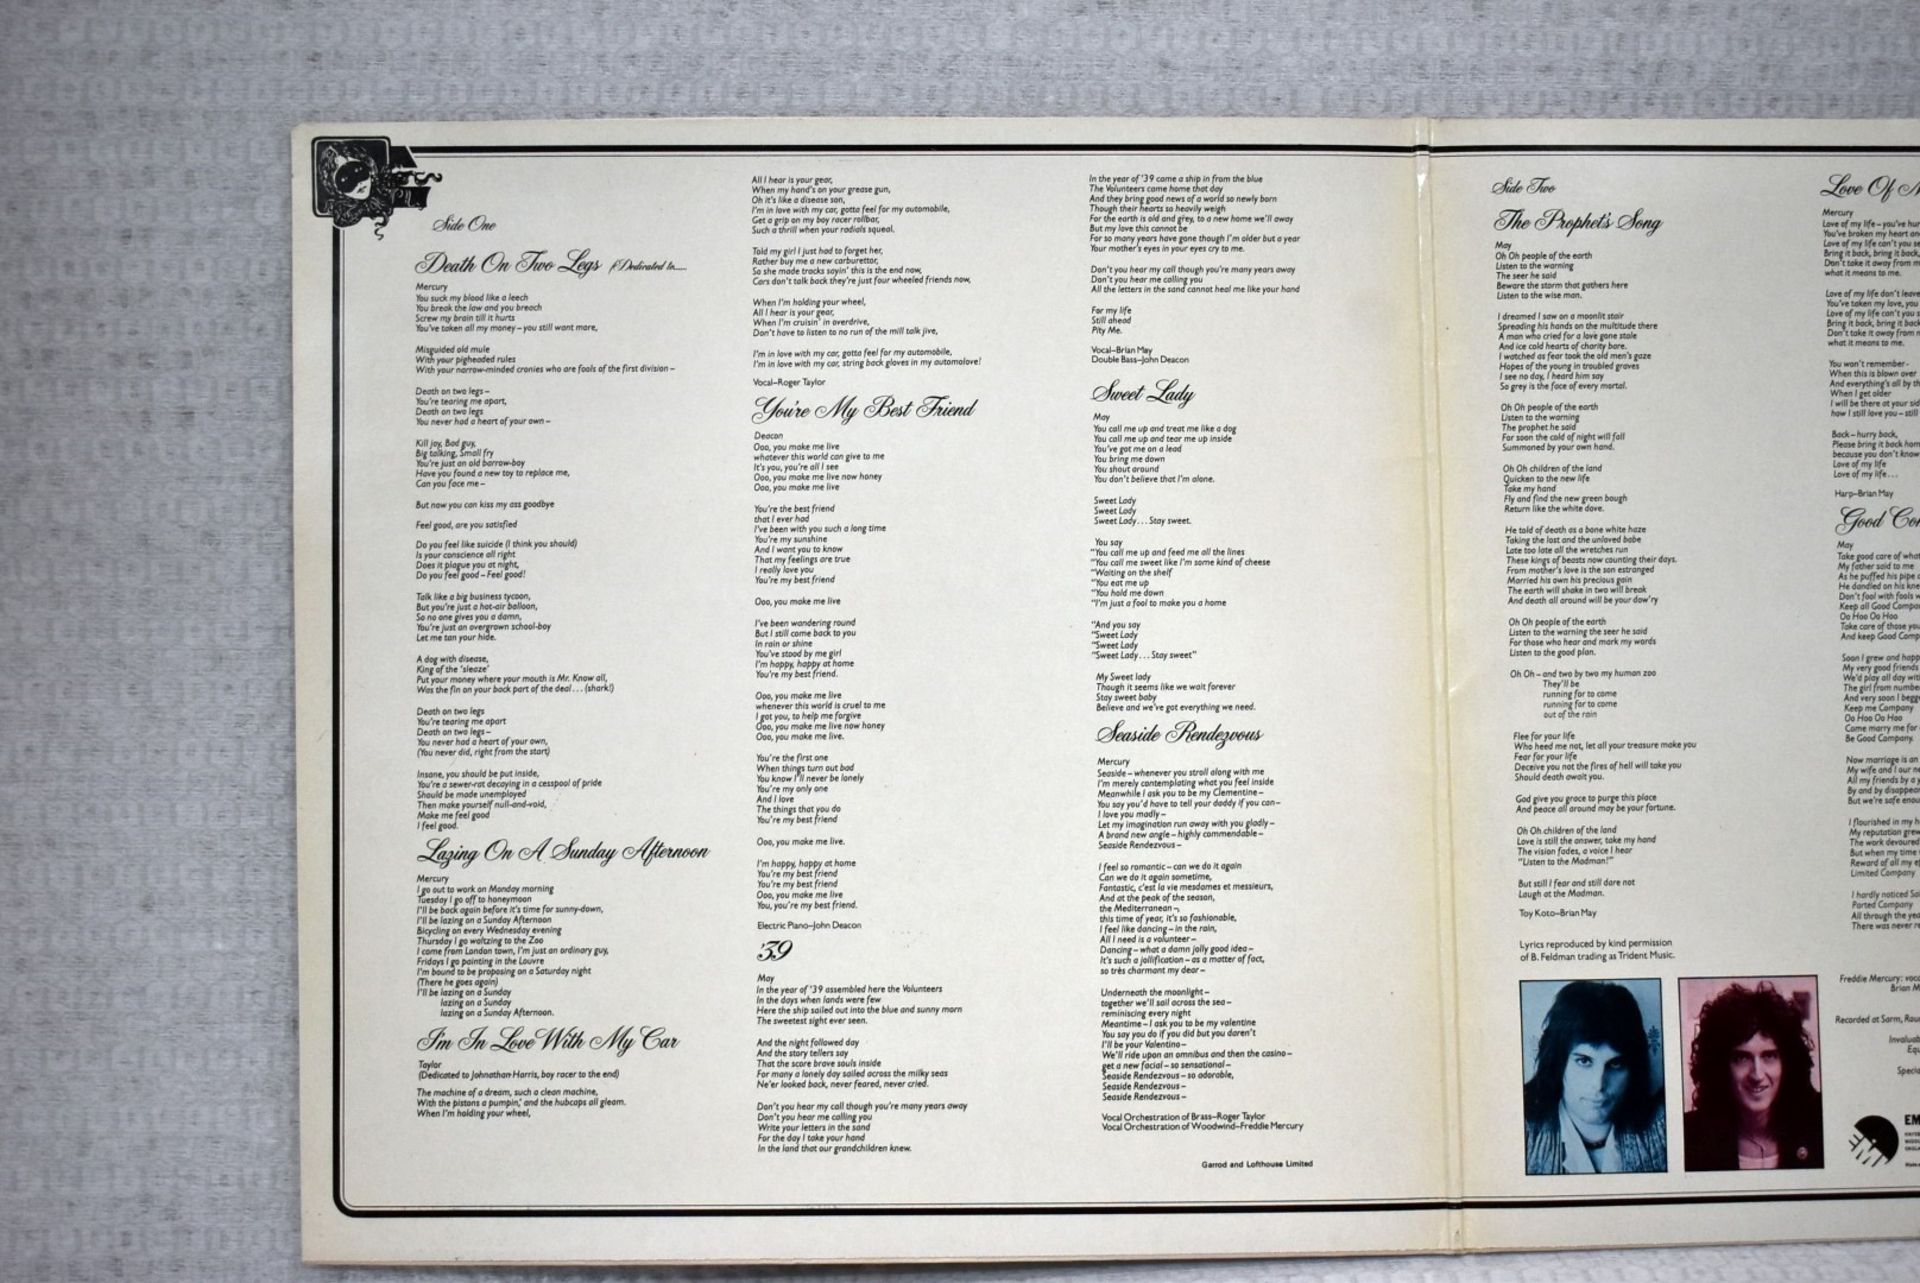 1 x QUEEN A Night At The Opera LP by EMI Records 1975 2 Sided 12 Inch Vinyl with Lyrics - Ref: - Image 9 of 21